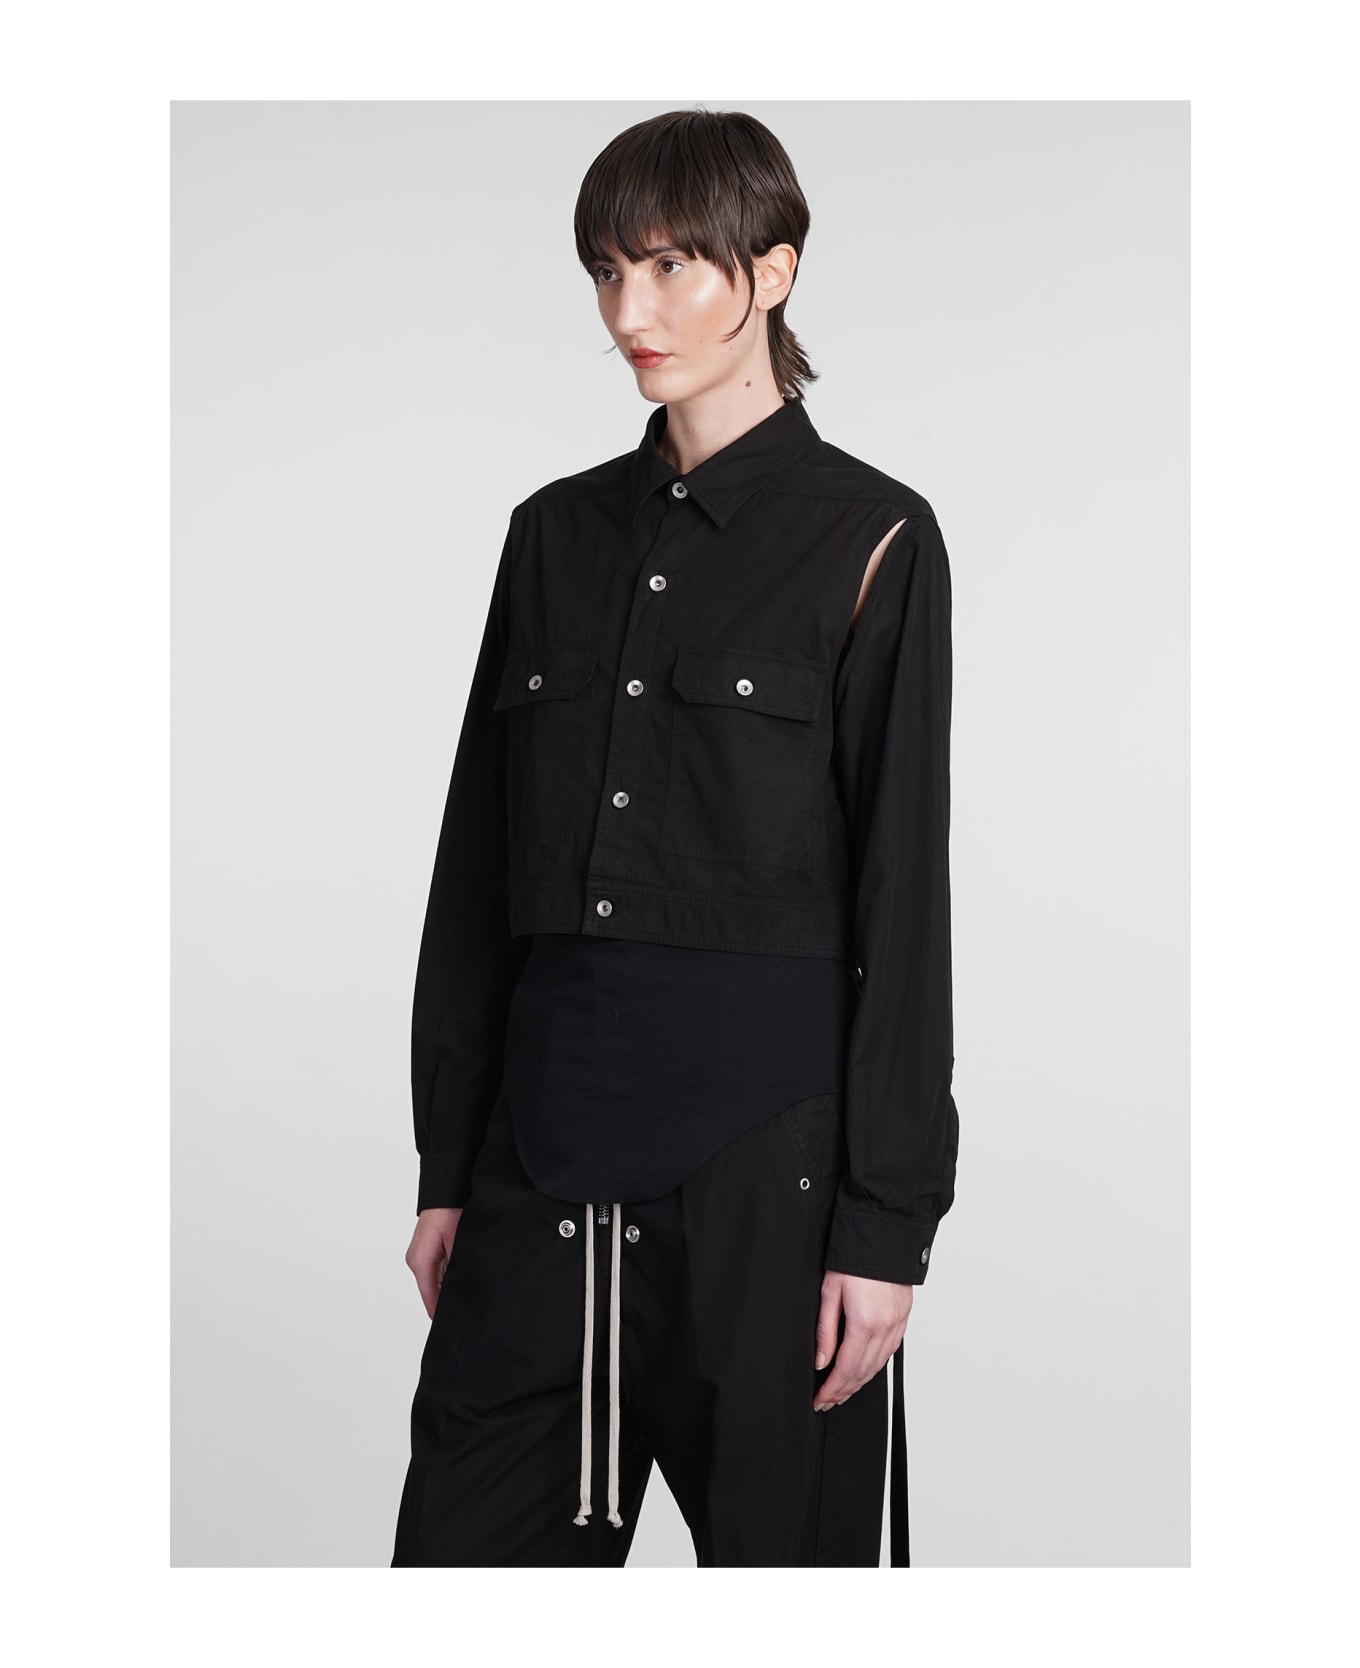 DRKSHDW Cape Sleeve Cropped Casual Jacket In Black Cotton - black